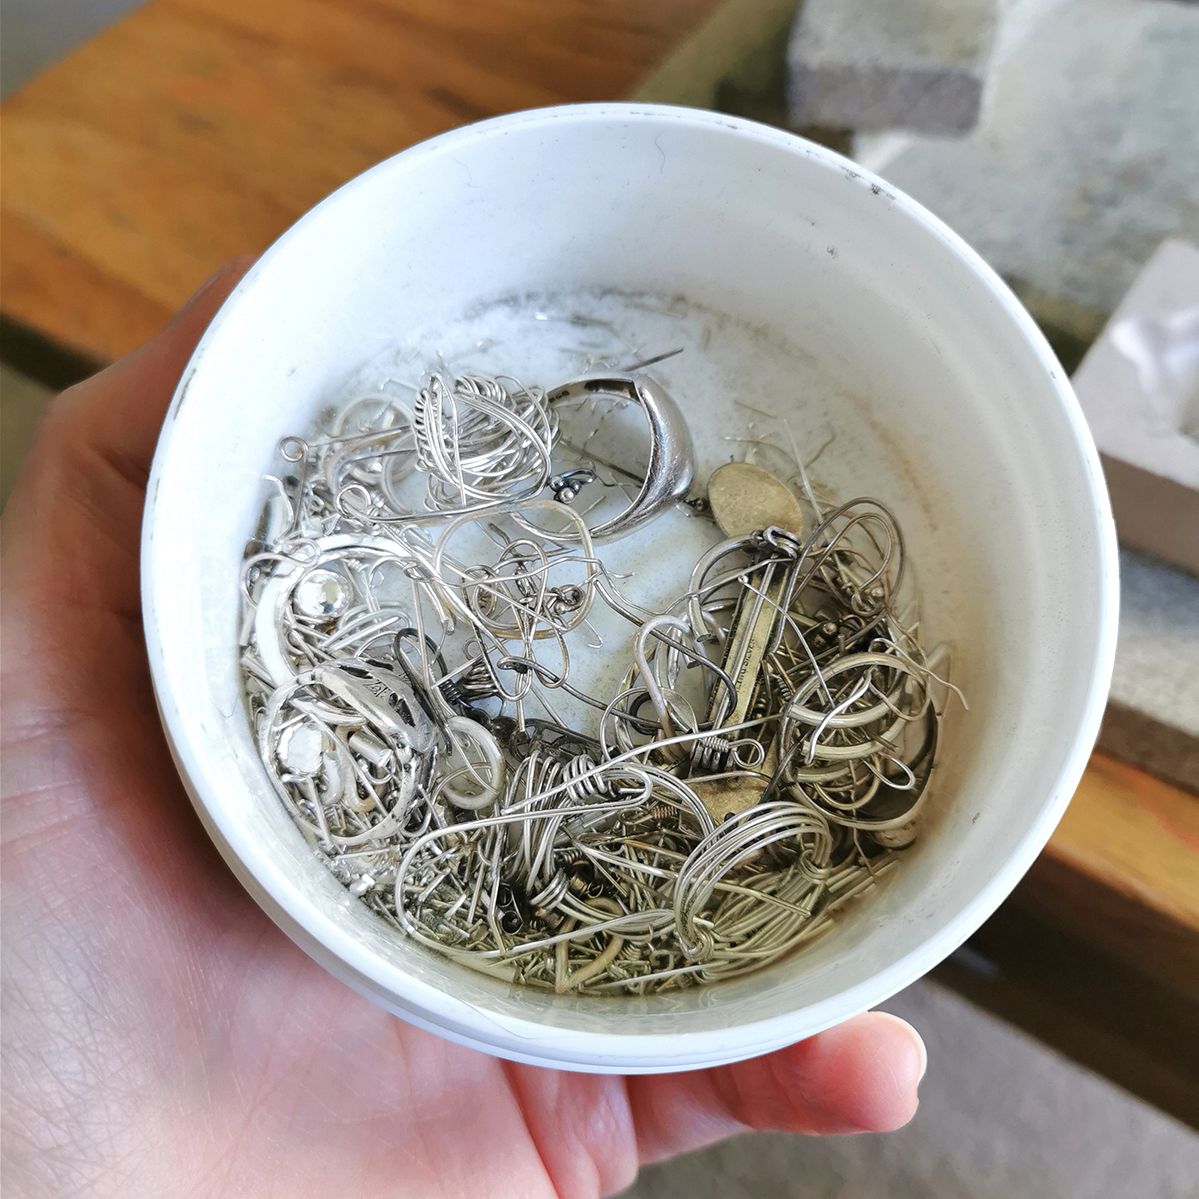 Making jewellery the Easy Way: Unveiling the Secret of Silver Solder